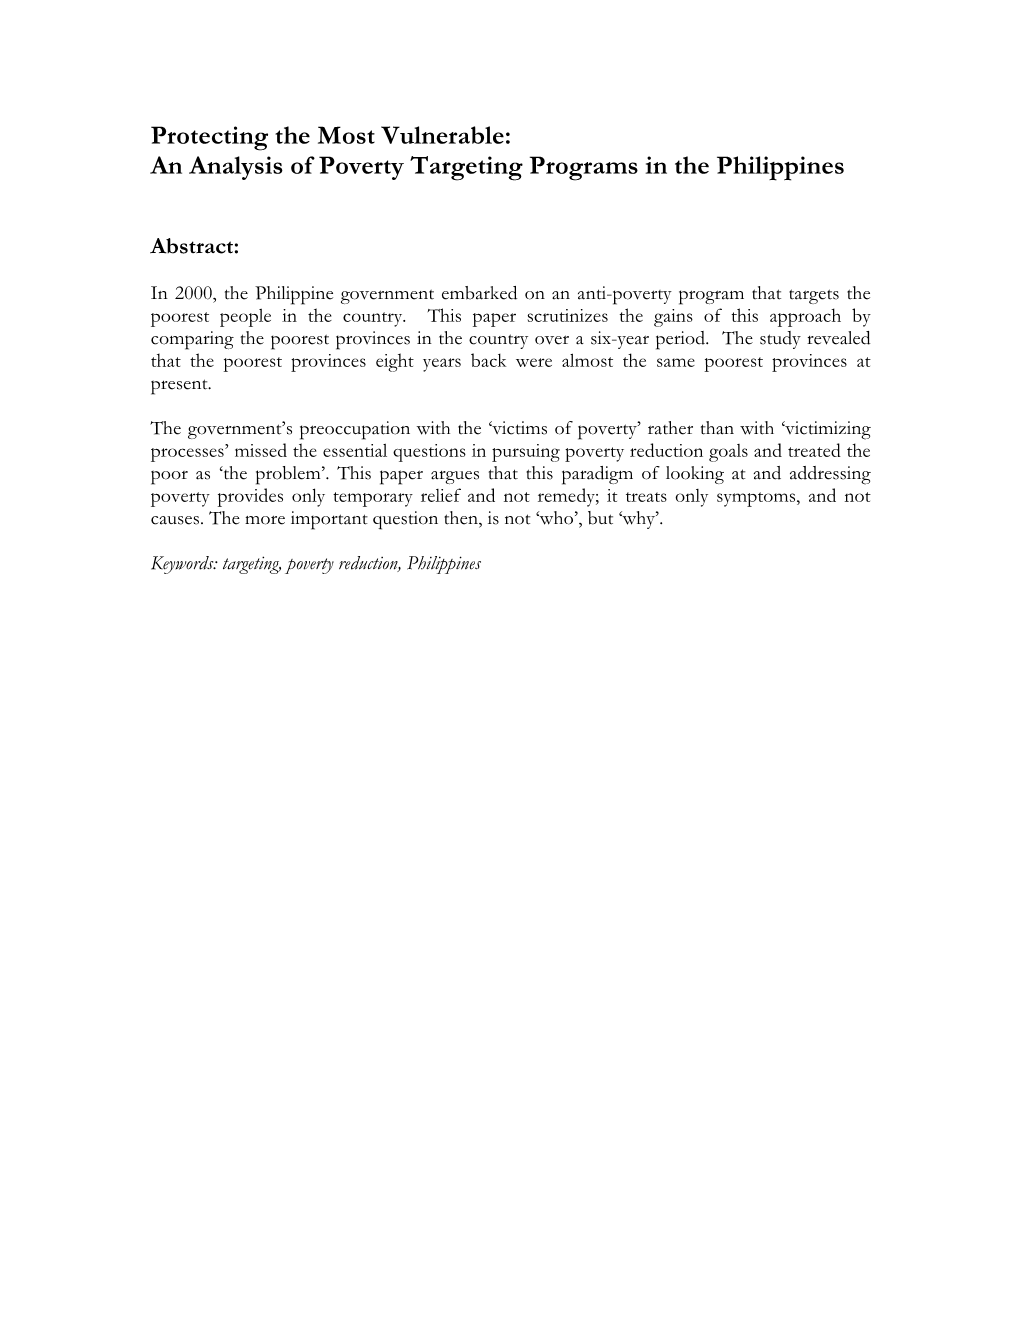 An Analysis of Poverty Targeting Programs in the Philippines